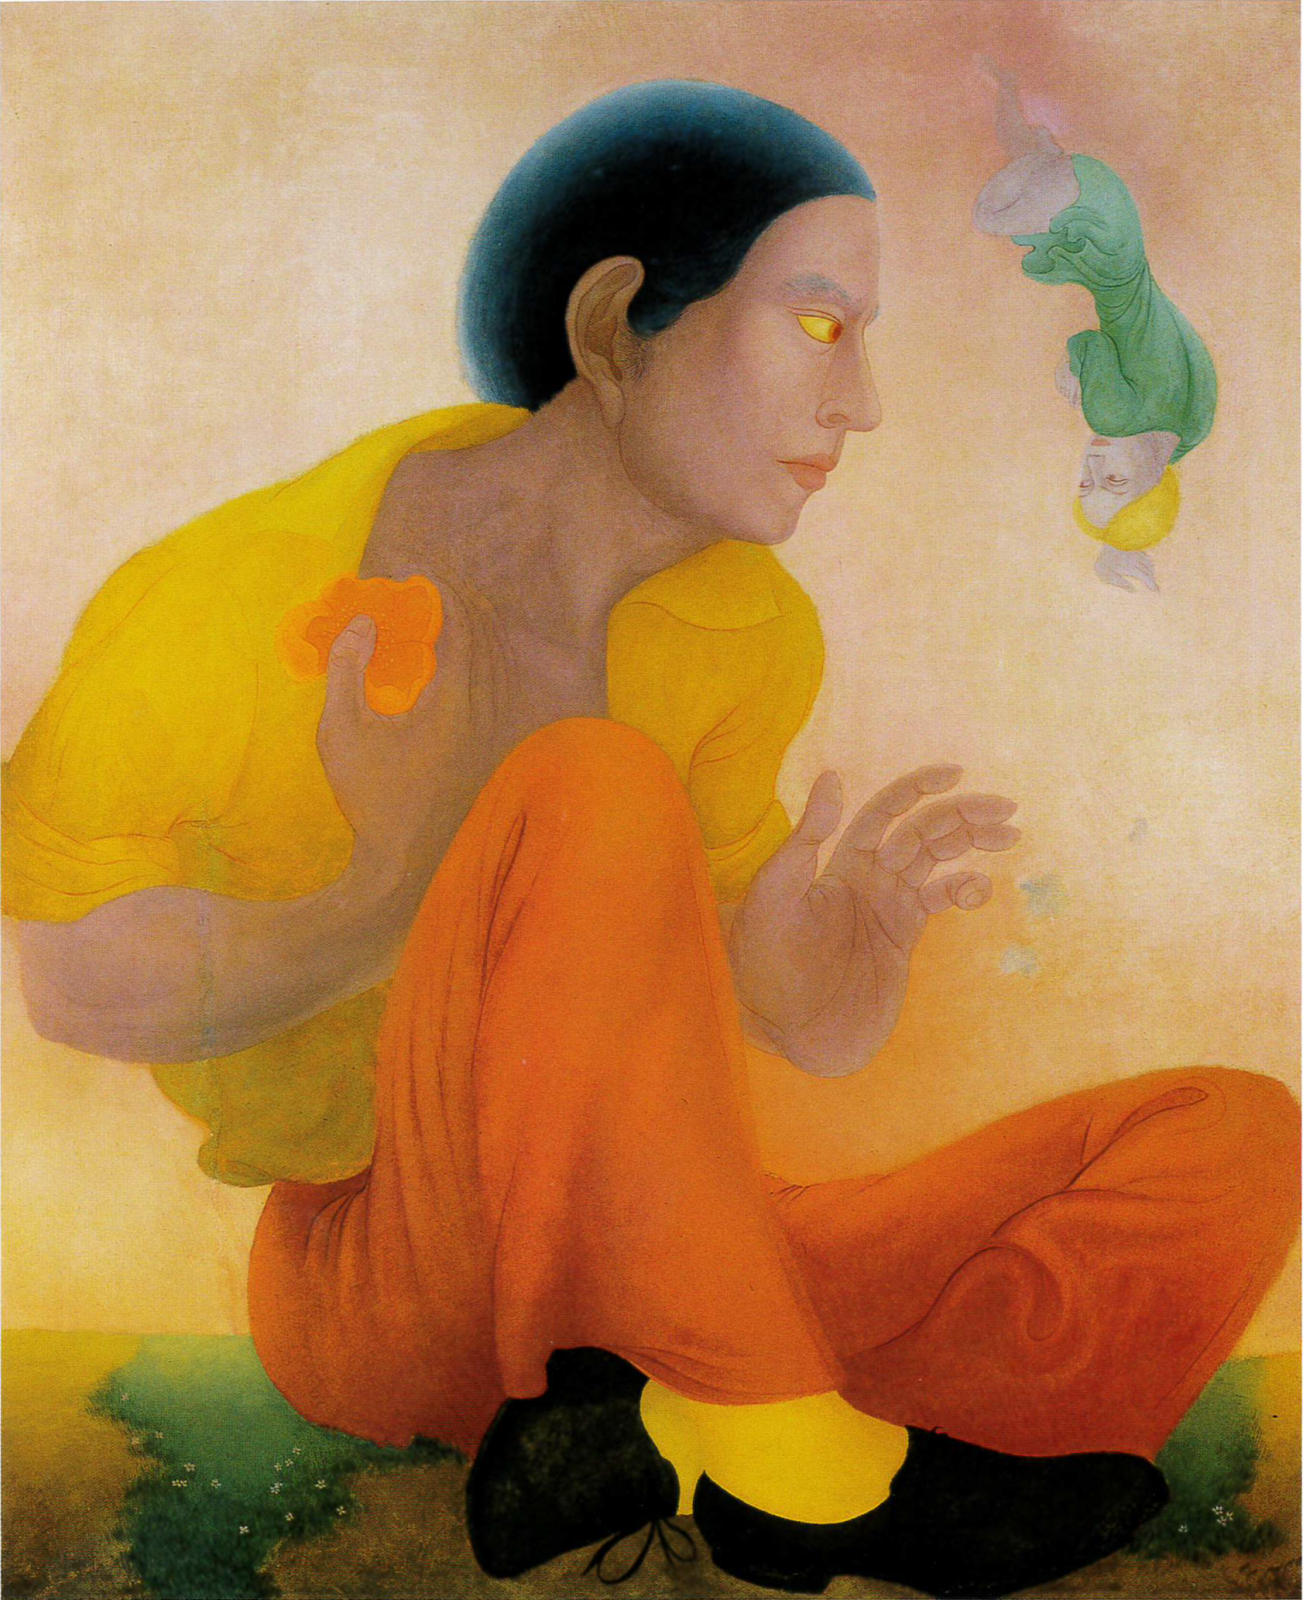 Vision of the Blue Lily (Self Portrait by Benji Okubo, ca. 1930s). Courtesy of Richard See.